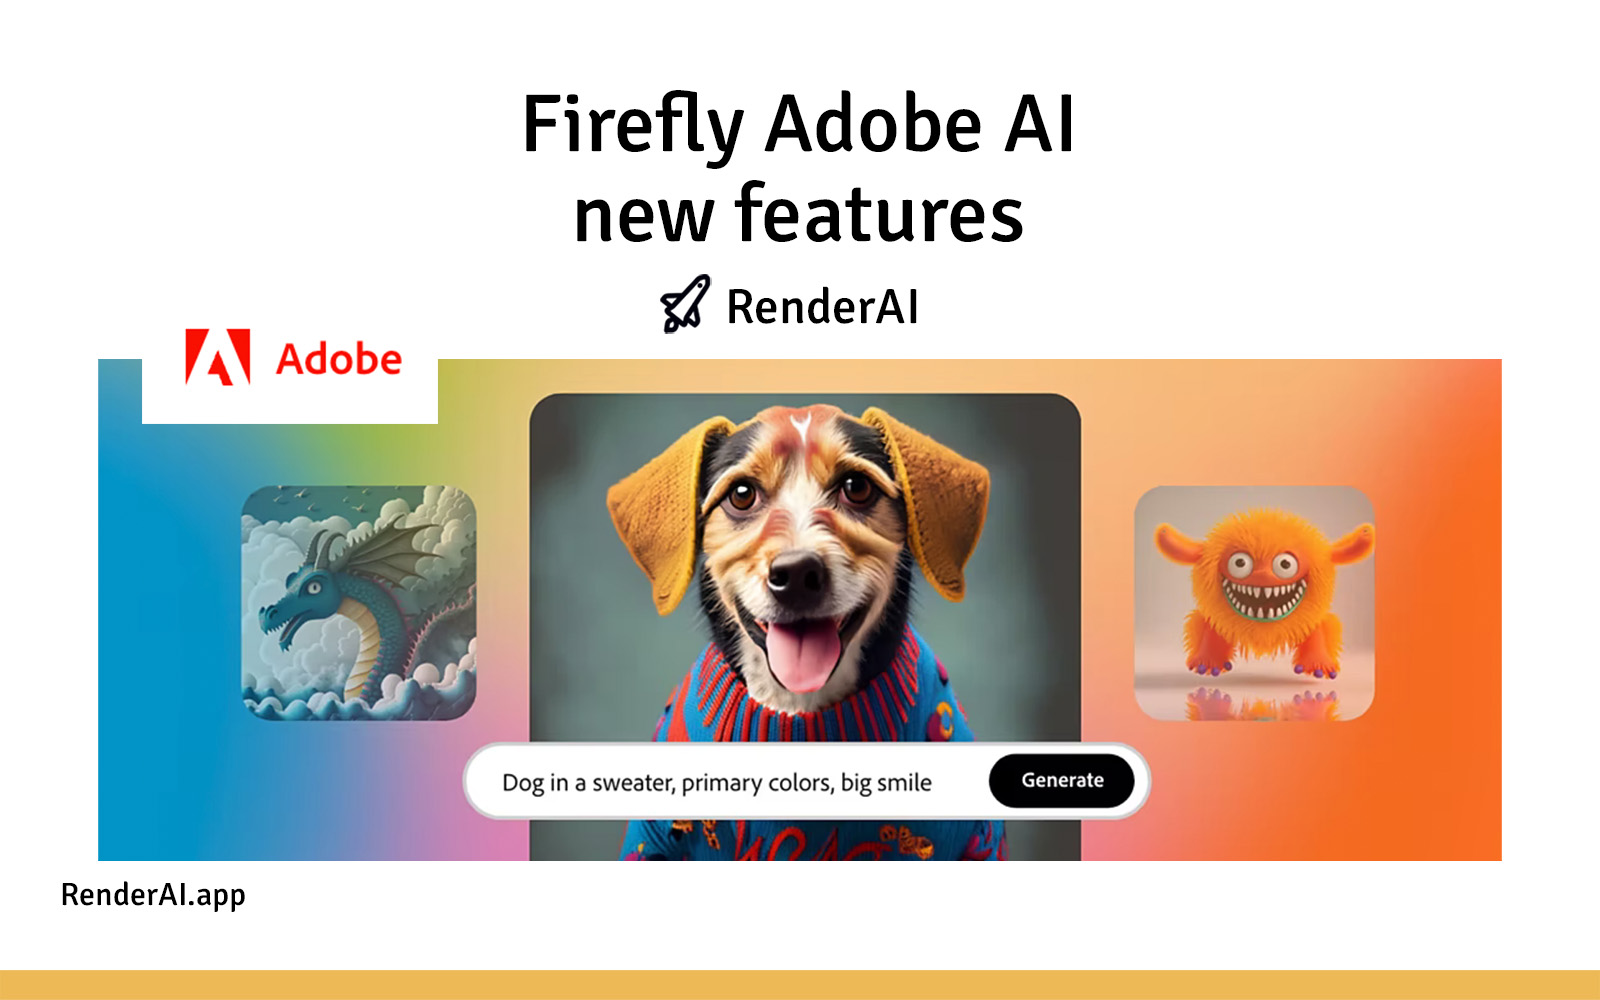 Firefly Adobe AI new features